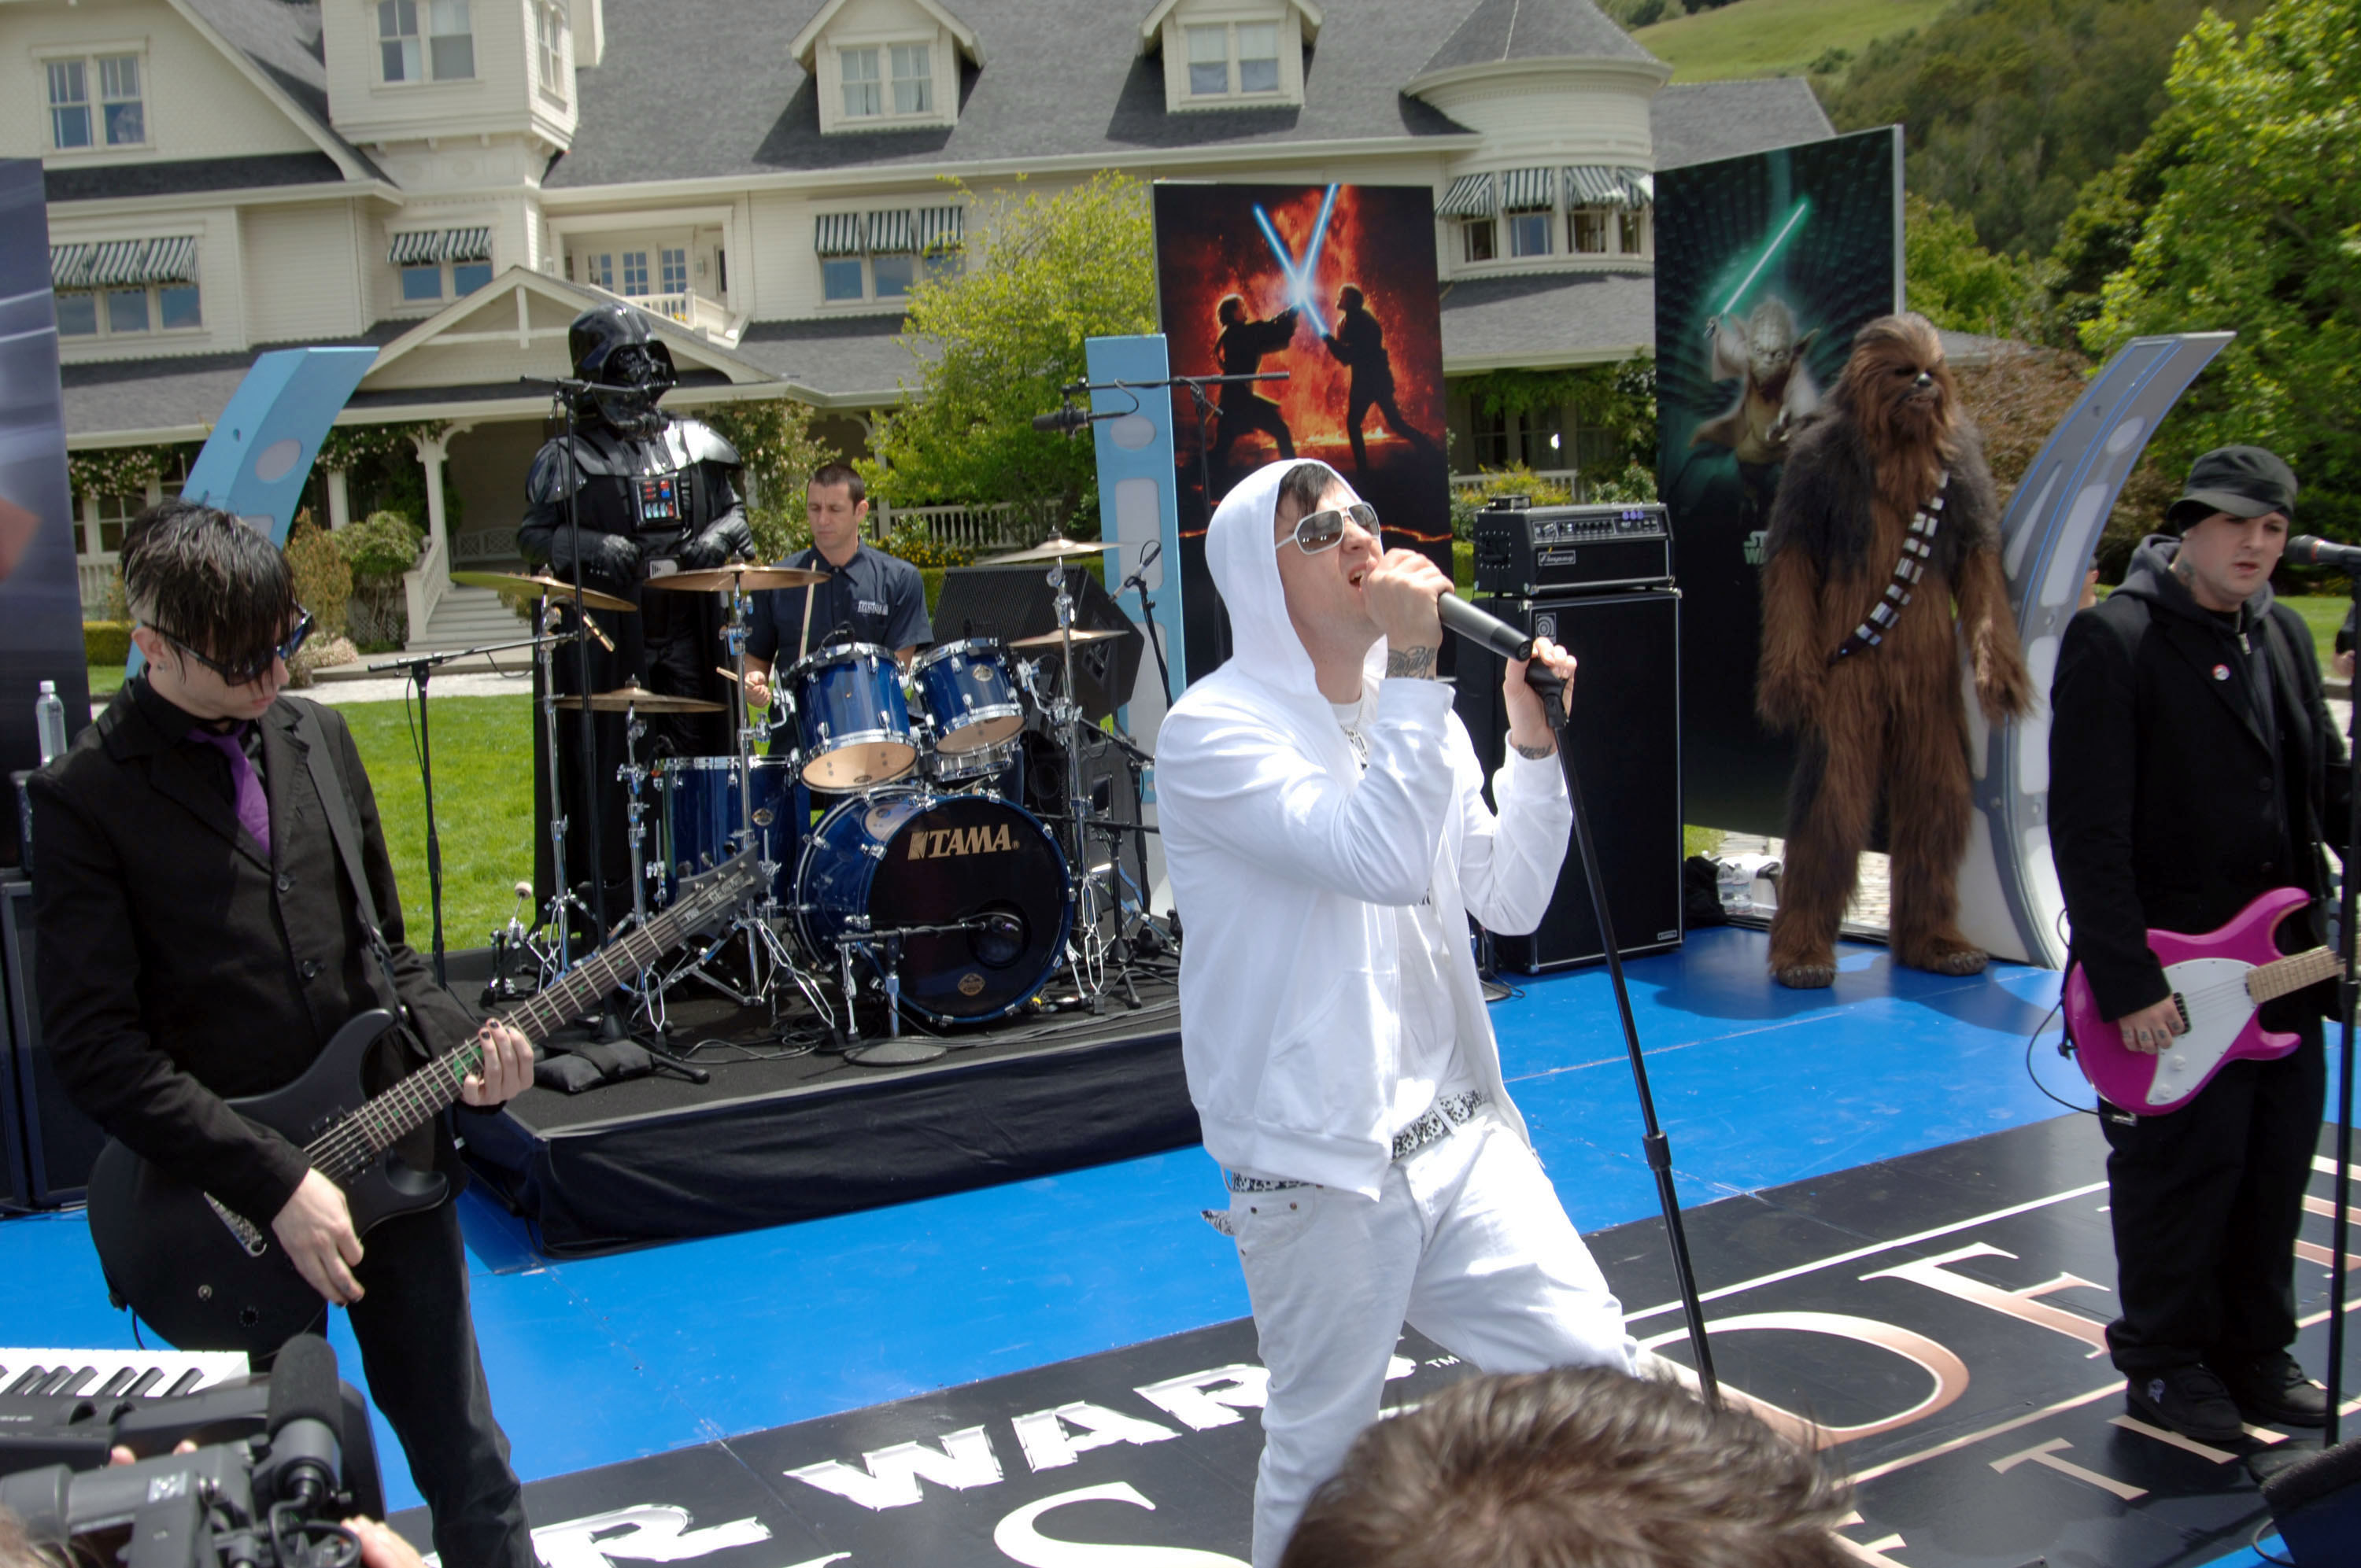 Good Charlotte performing outdoors at Lucas Ranch with Darth Vader and Chewbacca standing on stage with them.